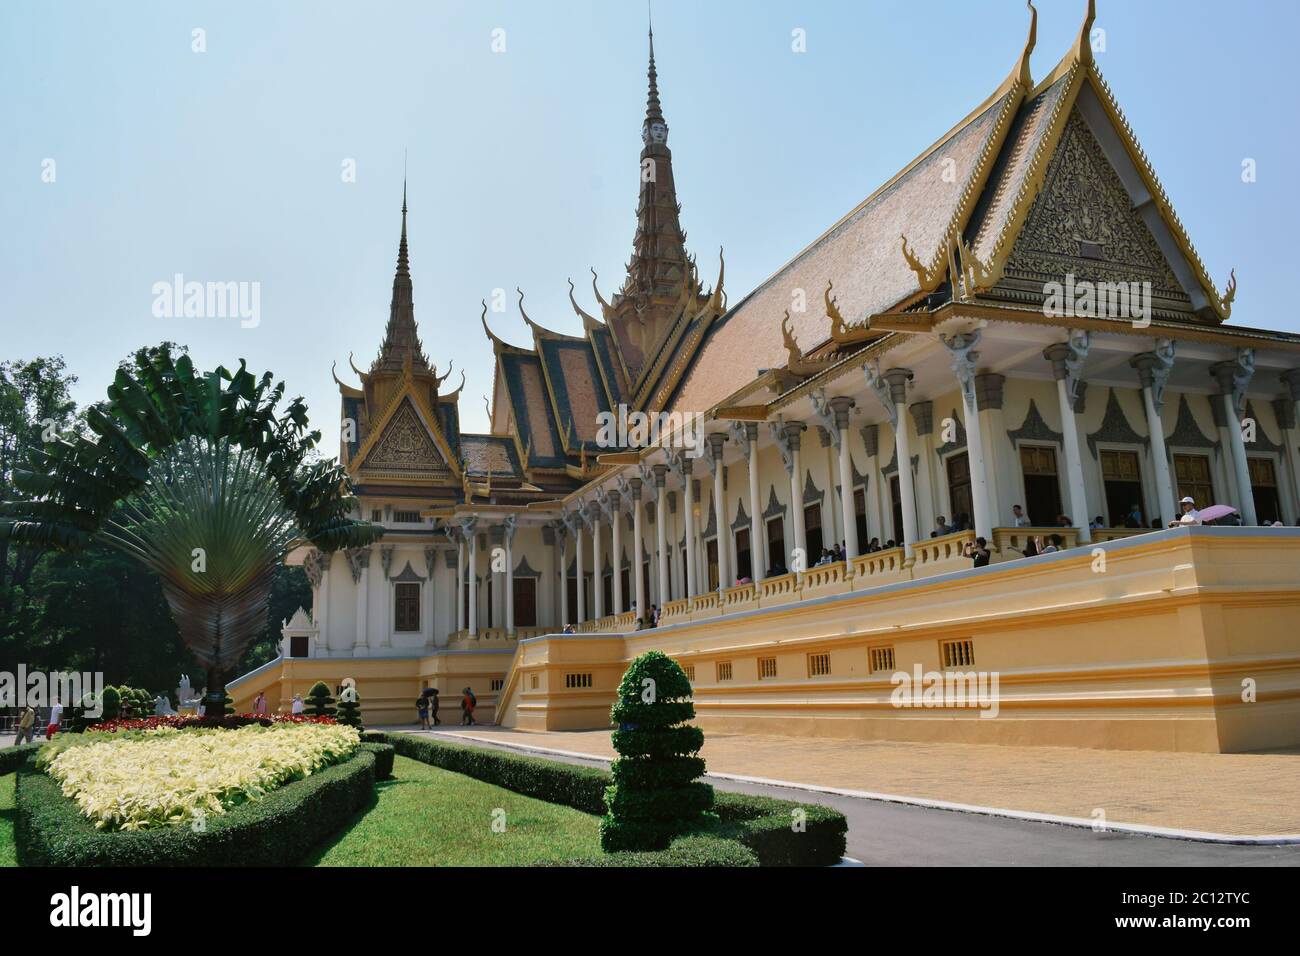 Touristy golden temple in the Phnom Penh Royal Palace in Cambodia Stock Photo